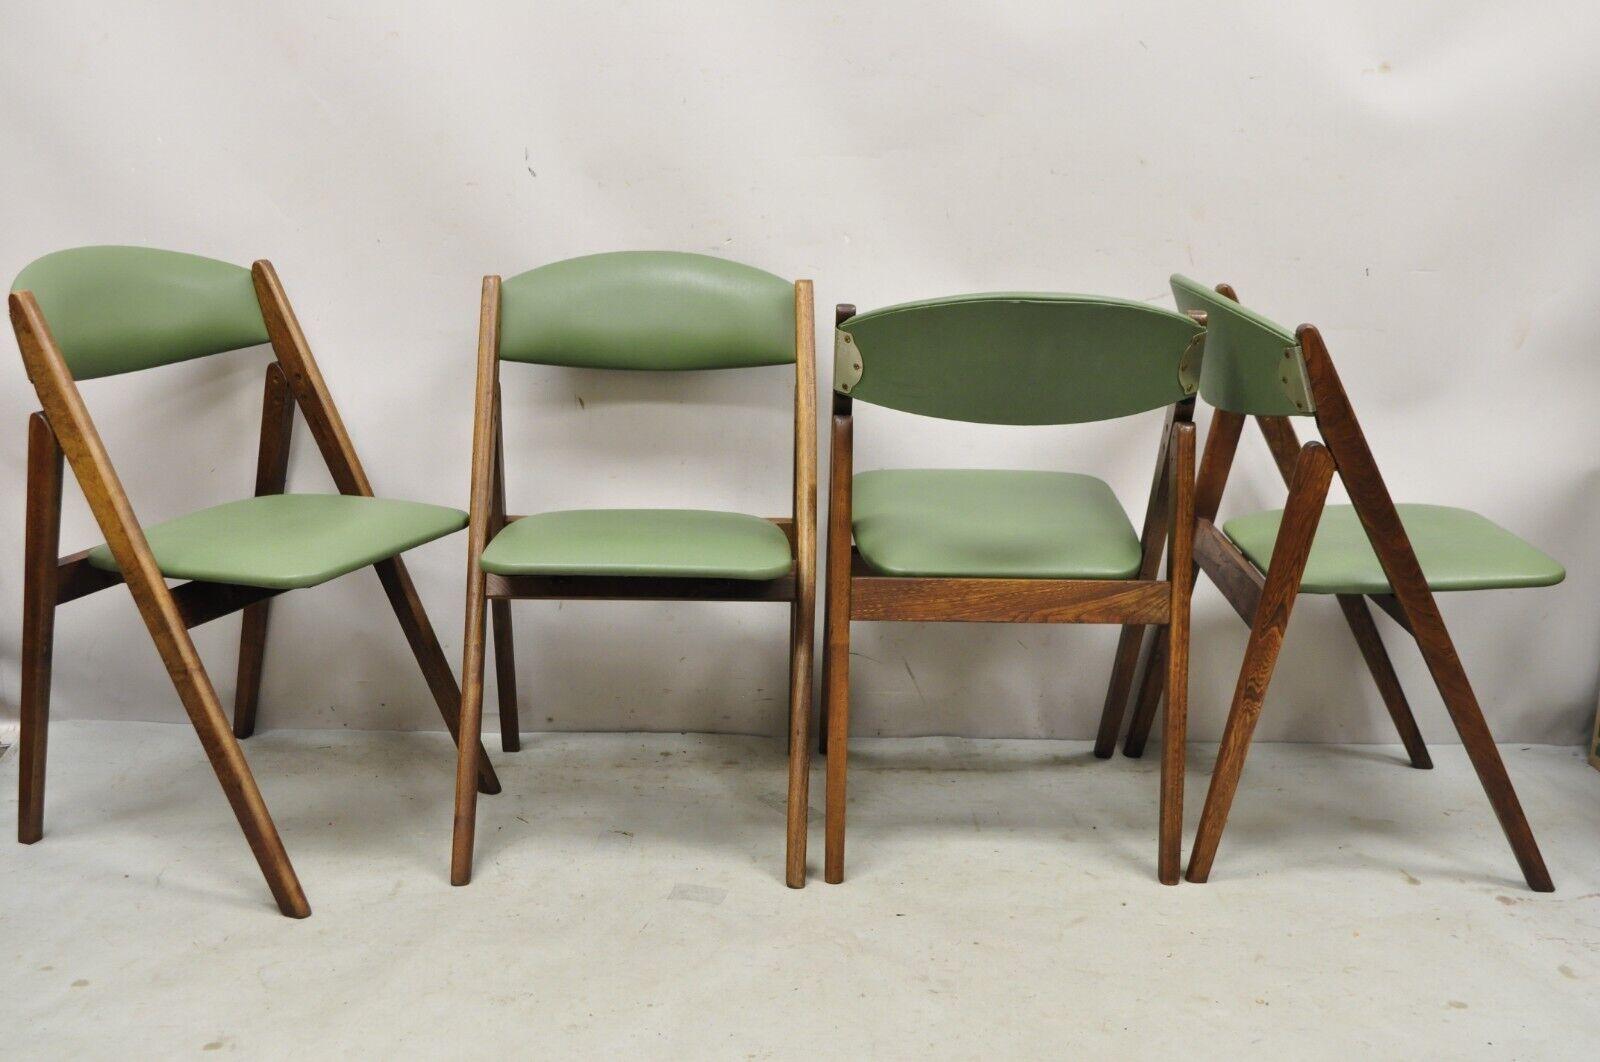 Vintage Stakmore Green Mid-Century Modern Folding Game Chairs - Set of 4 4